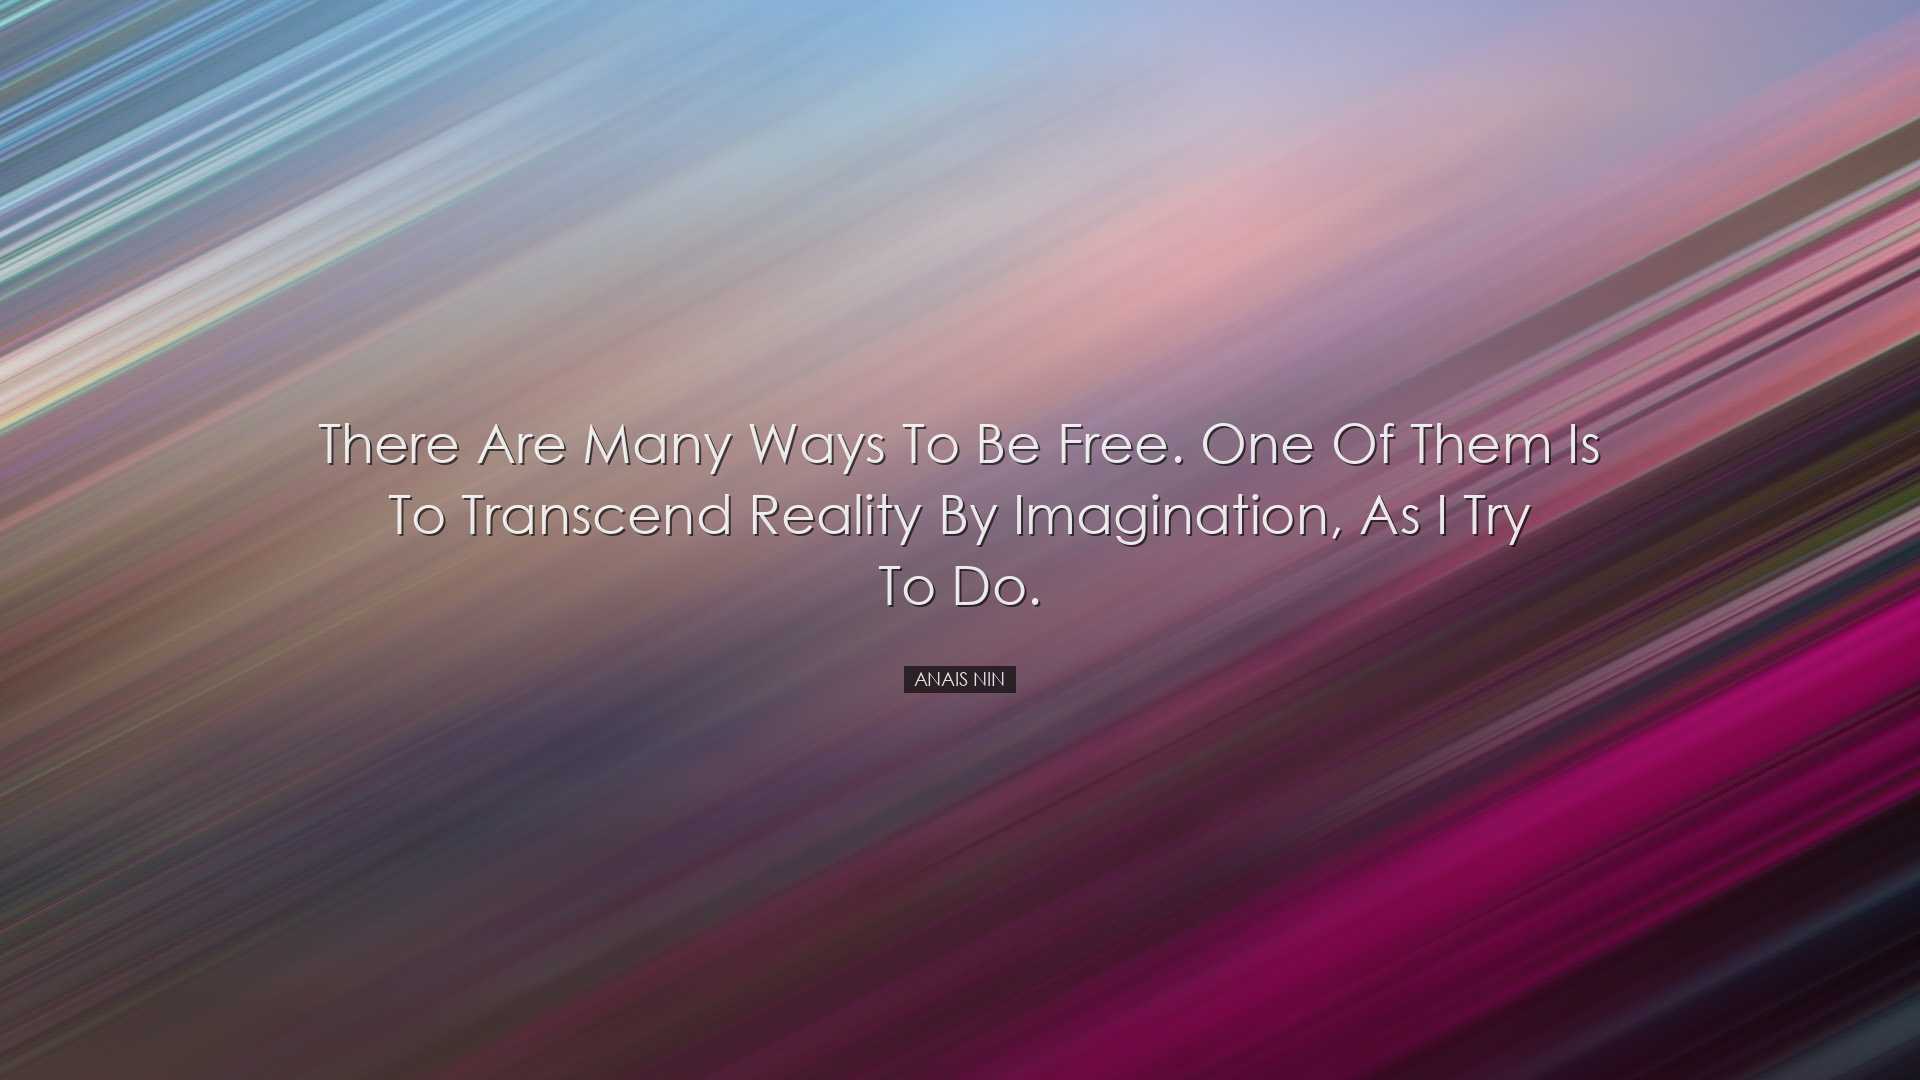 There are many ways to be free. One of them is to transcend realit